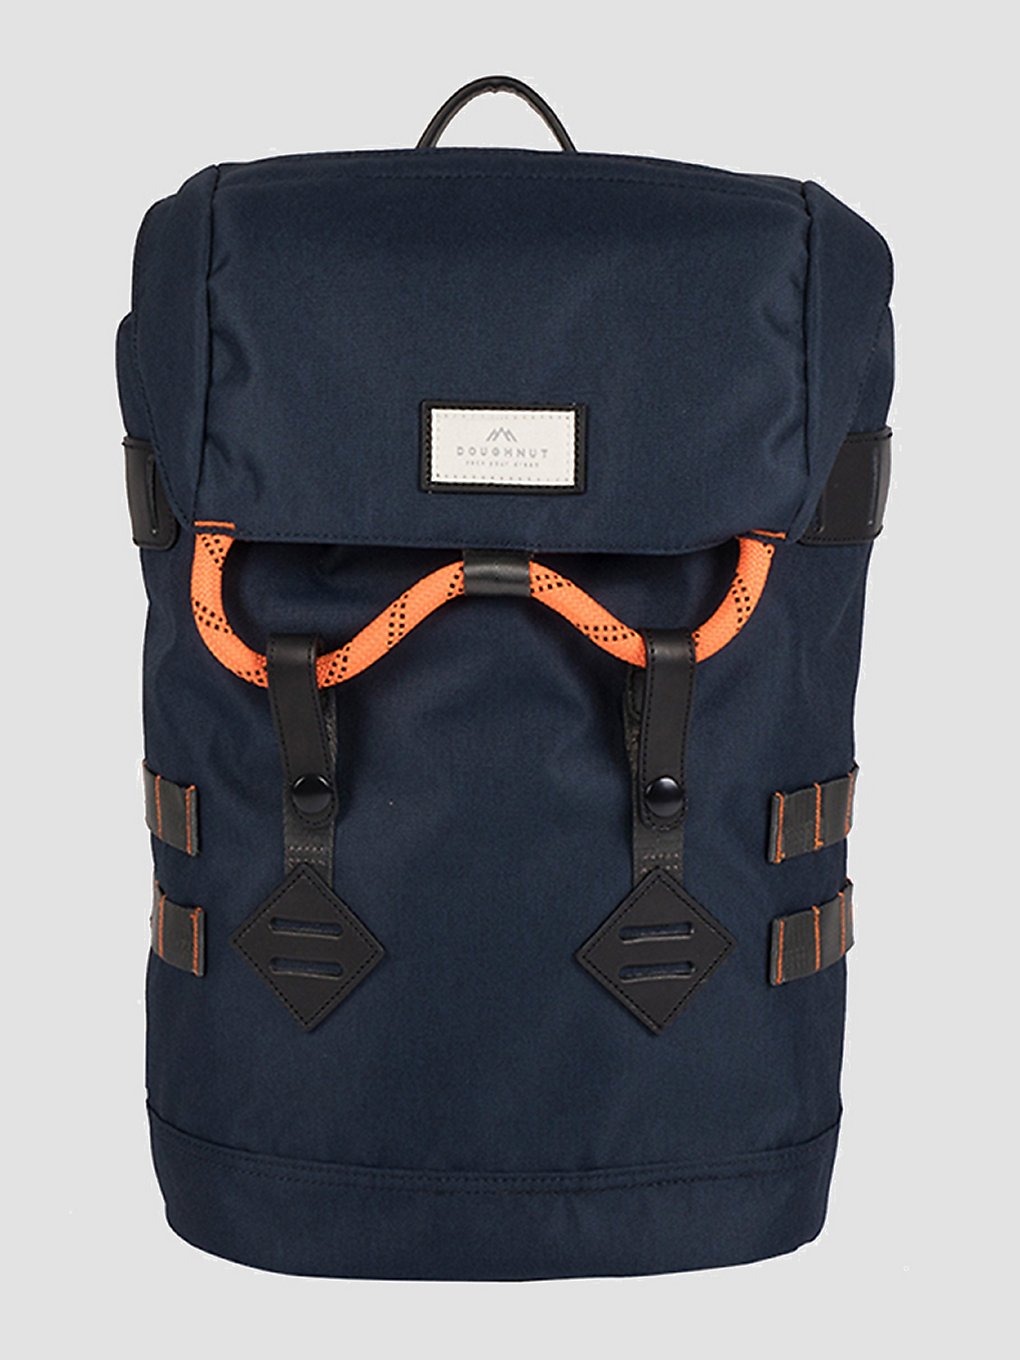 Doughnut Colorado Small Accents Series Backpack navy x orange